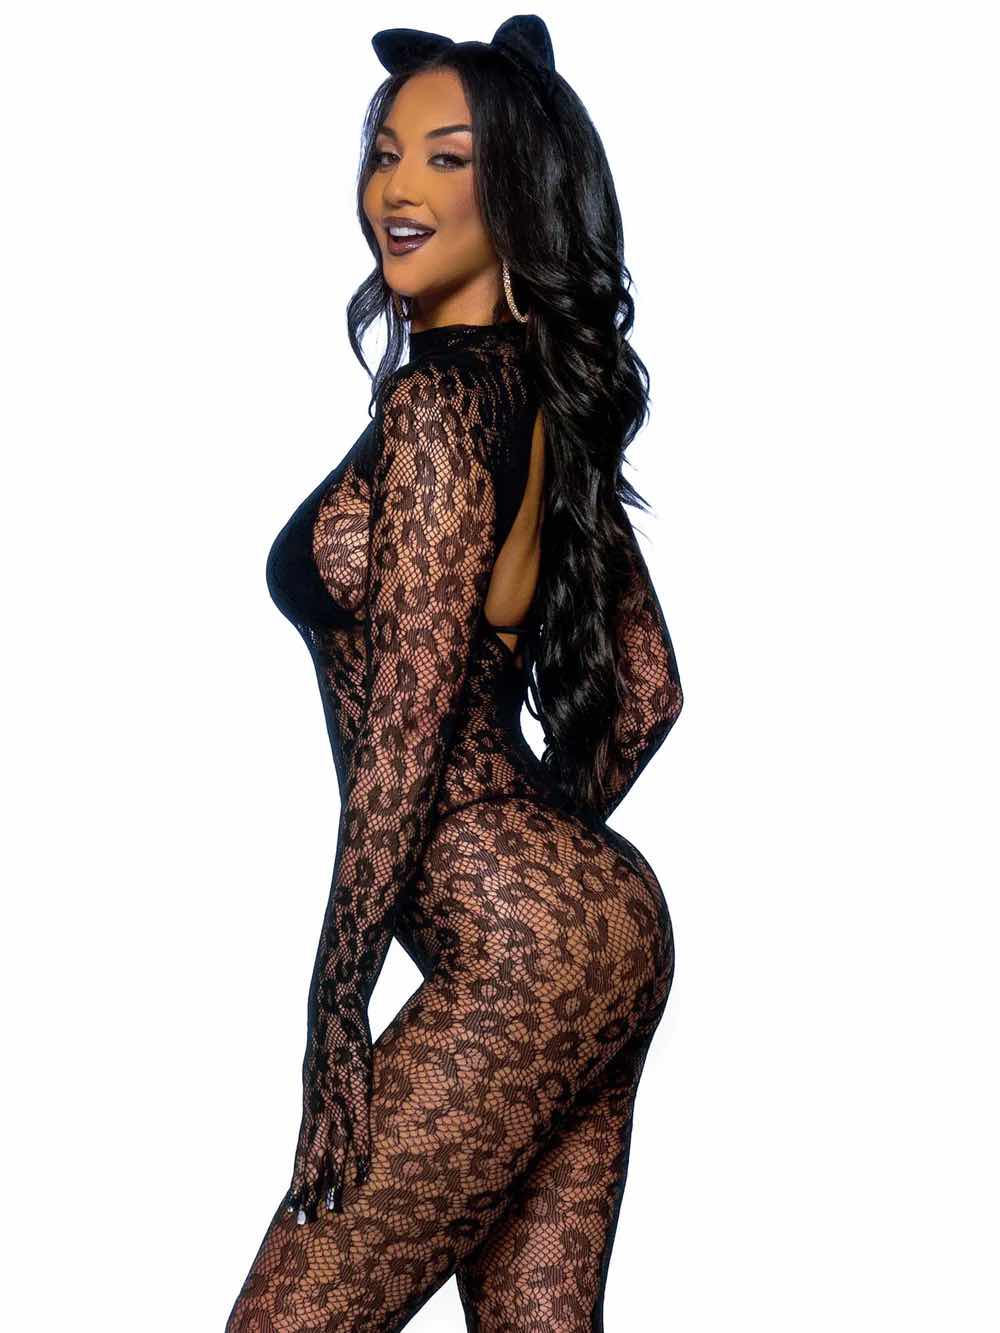 A model wearing cat ears and the Net Leopard Print Gloved Catsuit Bodystocking over a black bikini, left side view.